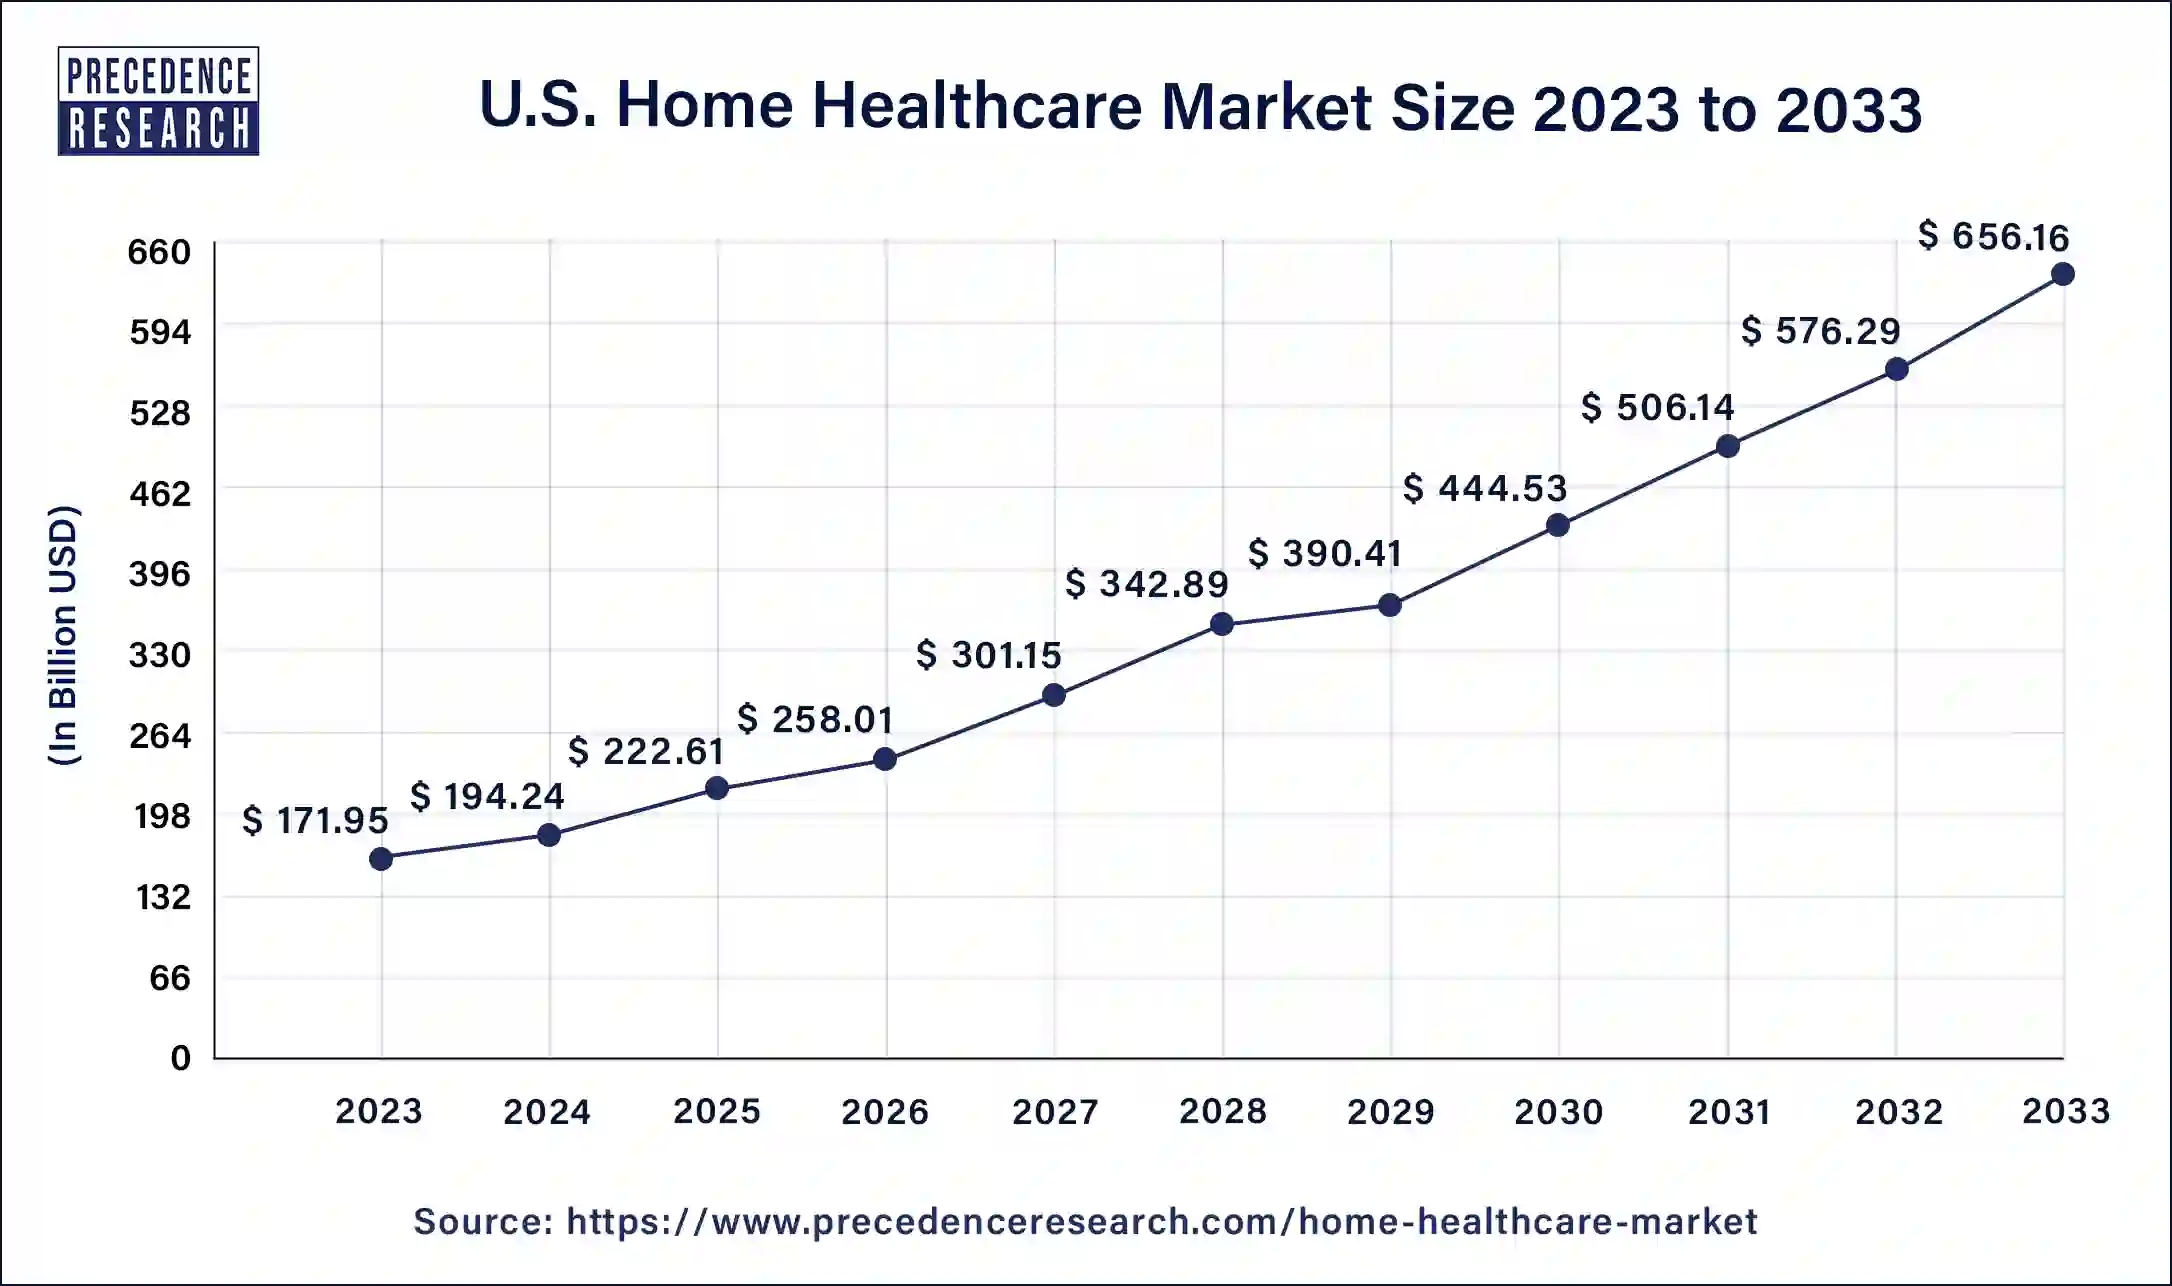 U.S. Home Healthcare Market Size 2024 to 2033